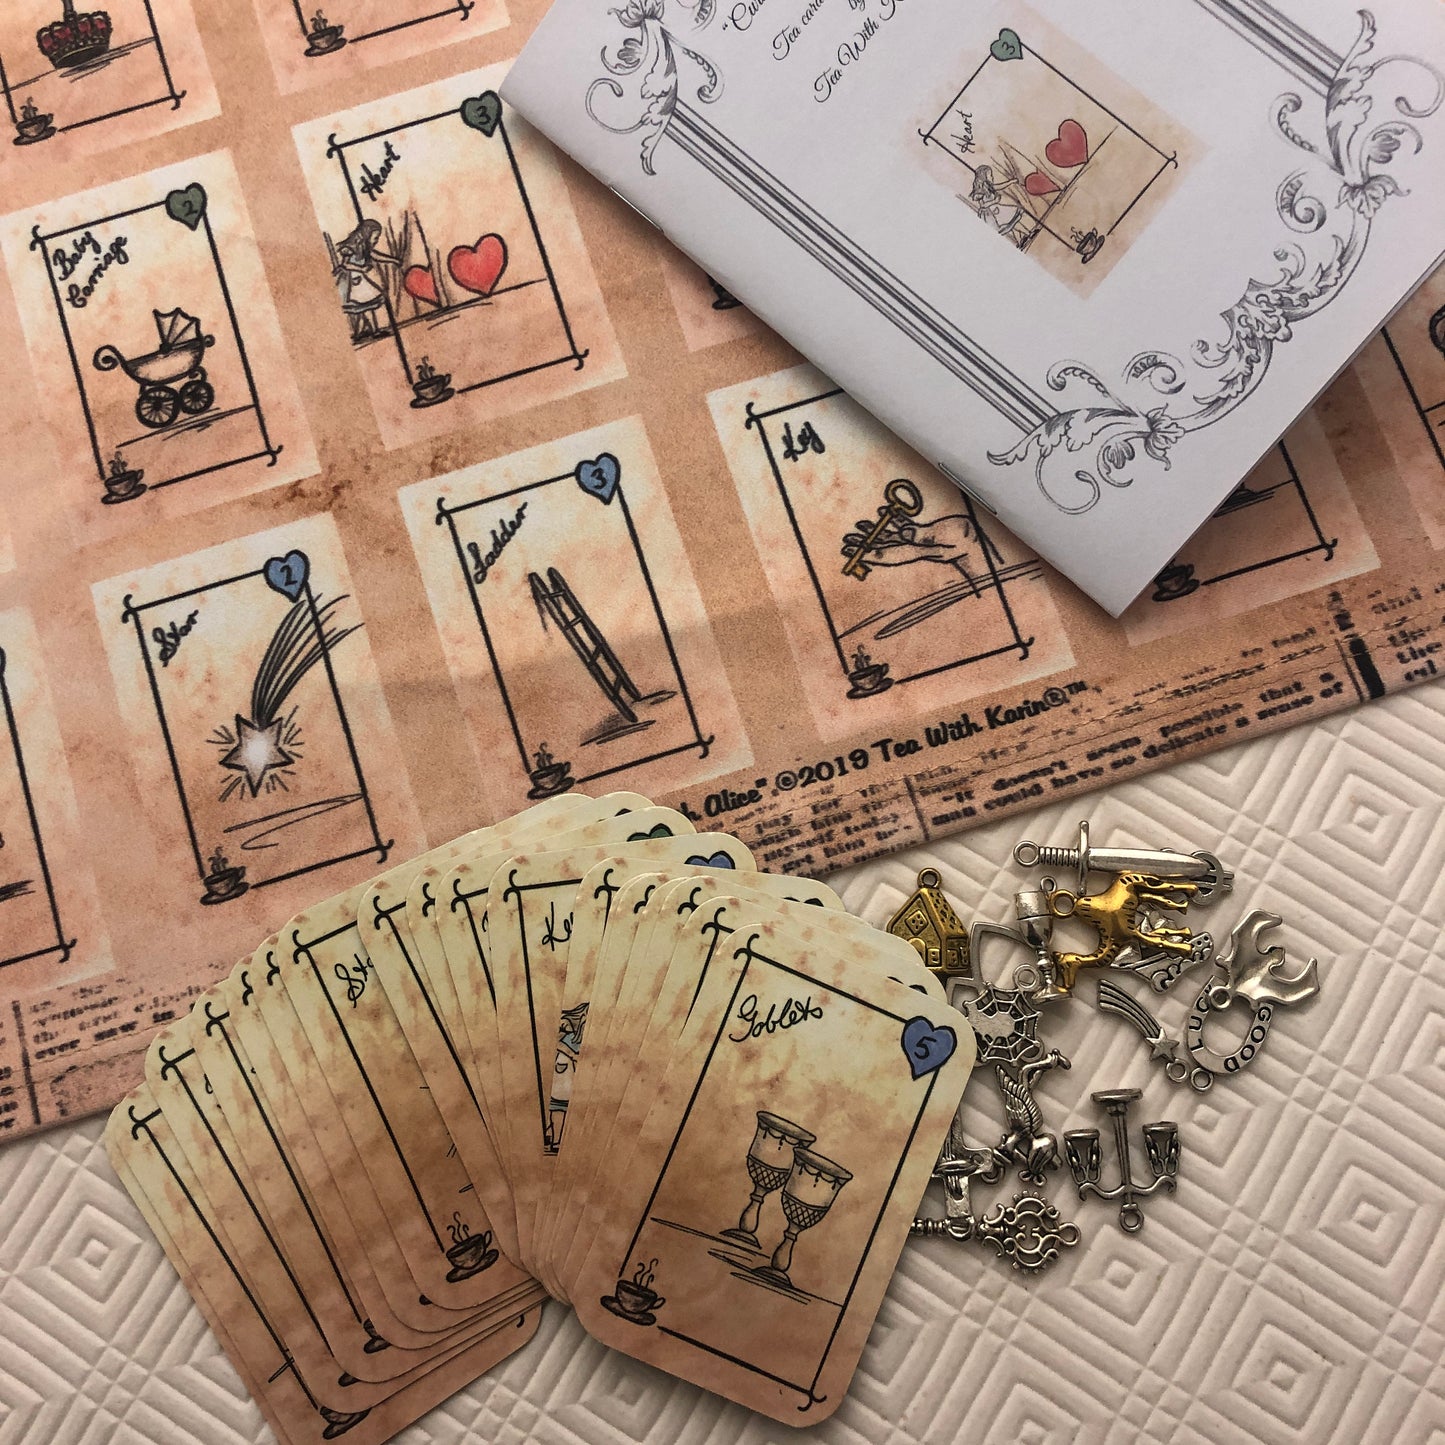 Lenormand, Tarot, Divination tools. Witchy gifts, Reading charms, Fortune telling charms, Oracle charms, Tarot charms, Esoteric charms, Spiritual amulets, talismans, Crystal divination, Runes and charms, Cartomancy amulets, Pendulum charms, Witchcraft tokens, fortune telling, psychic readings, tarot reading, Tarot deck, spiritual guidance, oracle cards,  oracle deck, tarot deck, witch, 